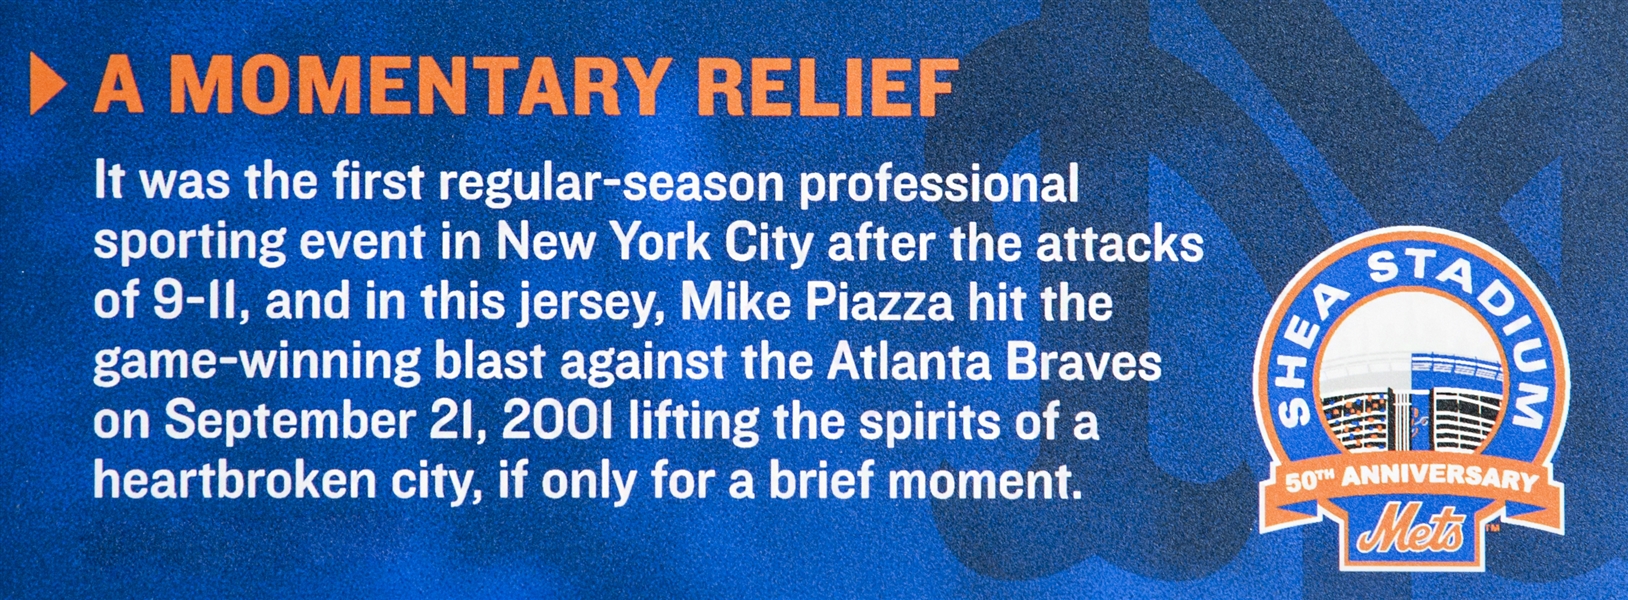 Mike Piazza's post-9/11 home run lifted New York, nation